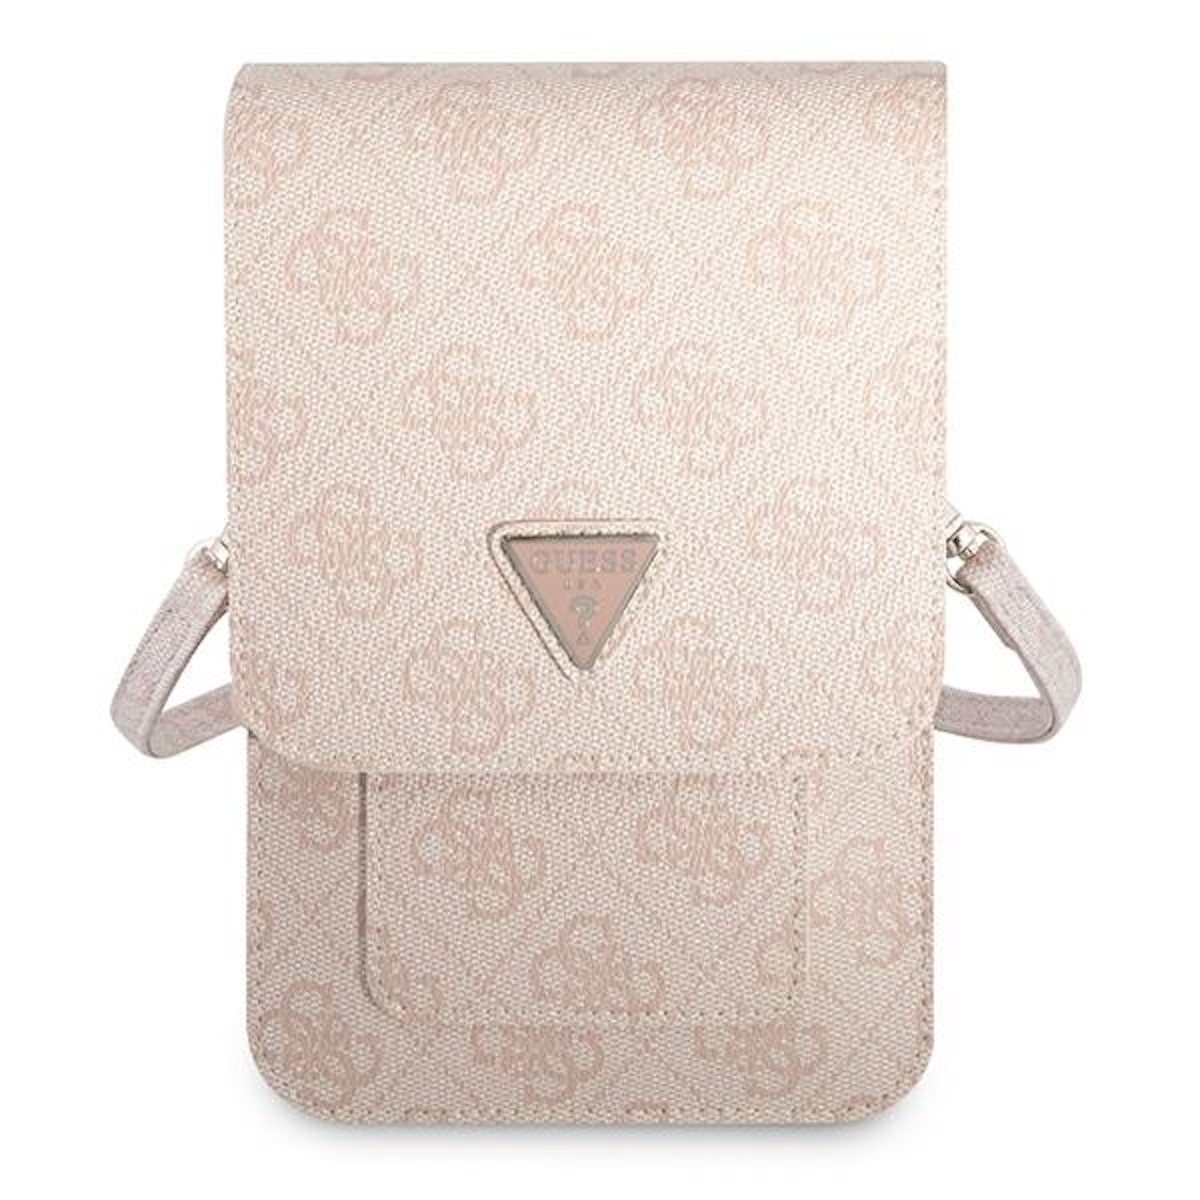 Full Rosa Universelle Cover, GUESS Tasche, Universell, Torebka Umhängetasche, Triangle